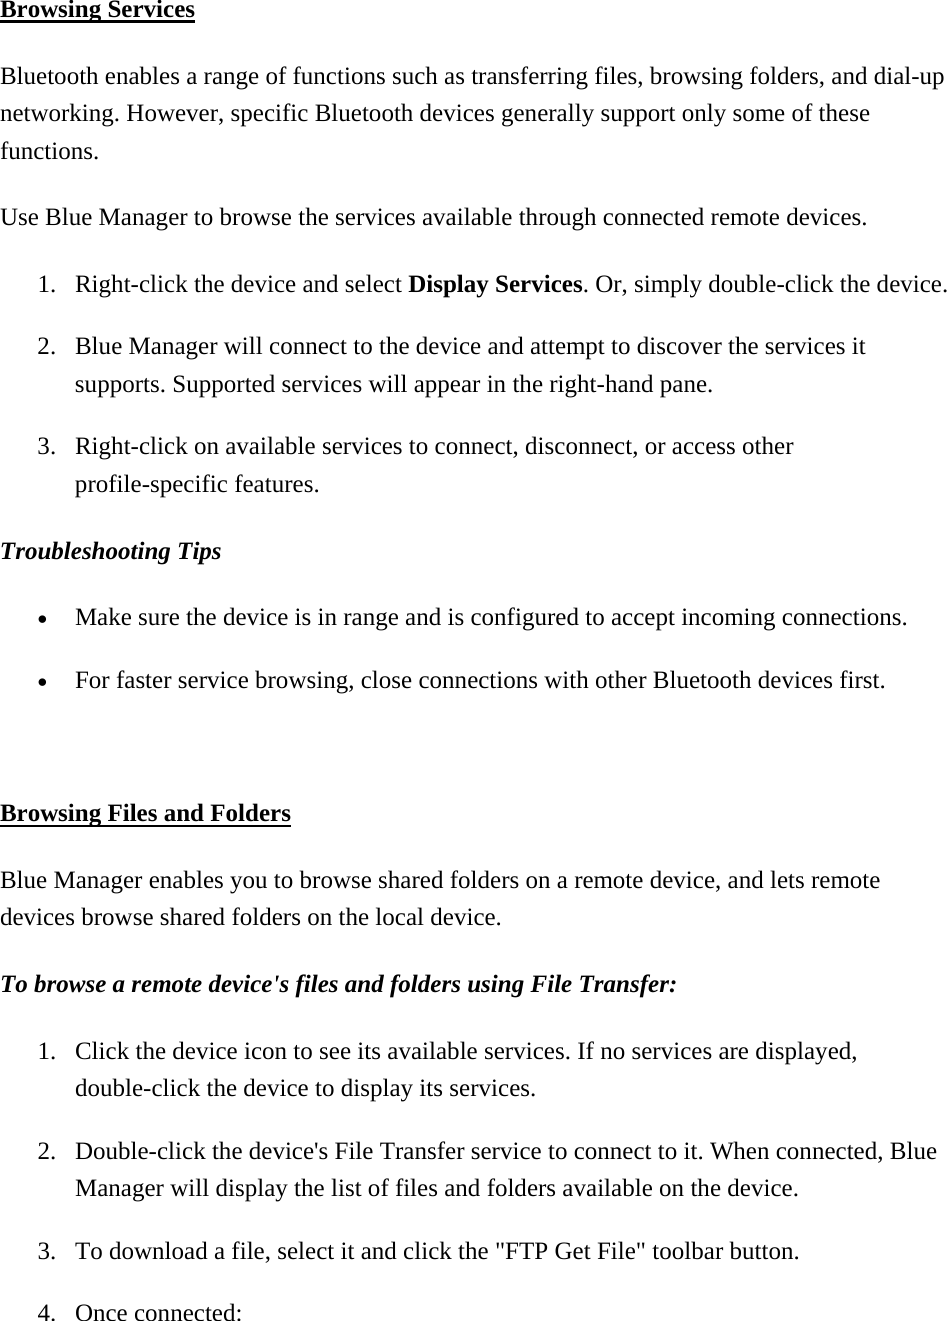  Browsing Services Bluetooth enables a range of functions such as transferring files, browsing folders, and dial-up networking. However, specific Bluetooth devices generally support only some of these functions. Use Blue Manager to browse the services available through connected remote devices.   1.  Right-click the device and select Display Services. Or, simply double-click the device. 2.  Blue Manager will connect to the device and attempt to discover the services it supports. Supported services will appear in the right-hand pane. 3.  Right-click on available services to connect, disconnect, or access other profile-specific features. Troubleshooting Tips  •  Make sure the device is in range and is configured to accept incoming connections. •  For faster service browsing, close connections with other Bluetooth devices first.  Browsing Files and Folders Blue Manager enables you to browse shared folders on a remote device, and lets remote devices browse shared folders on the local device.   To browse a remote device&apos;s files and folders using File Transfer:  1.  Click the device icon to see its available services. If no services are displayed, double-click the device to display its services. 2.  Double-click the device&apos;s File Transfer service to connect to it. When connected, Blue Manager will display the list of files and folders available on the device. 3.  To download a file, select it and click the &quot;FTP Get File&quot; toolbar button. 4. Once connected: 